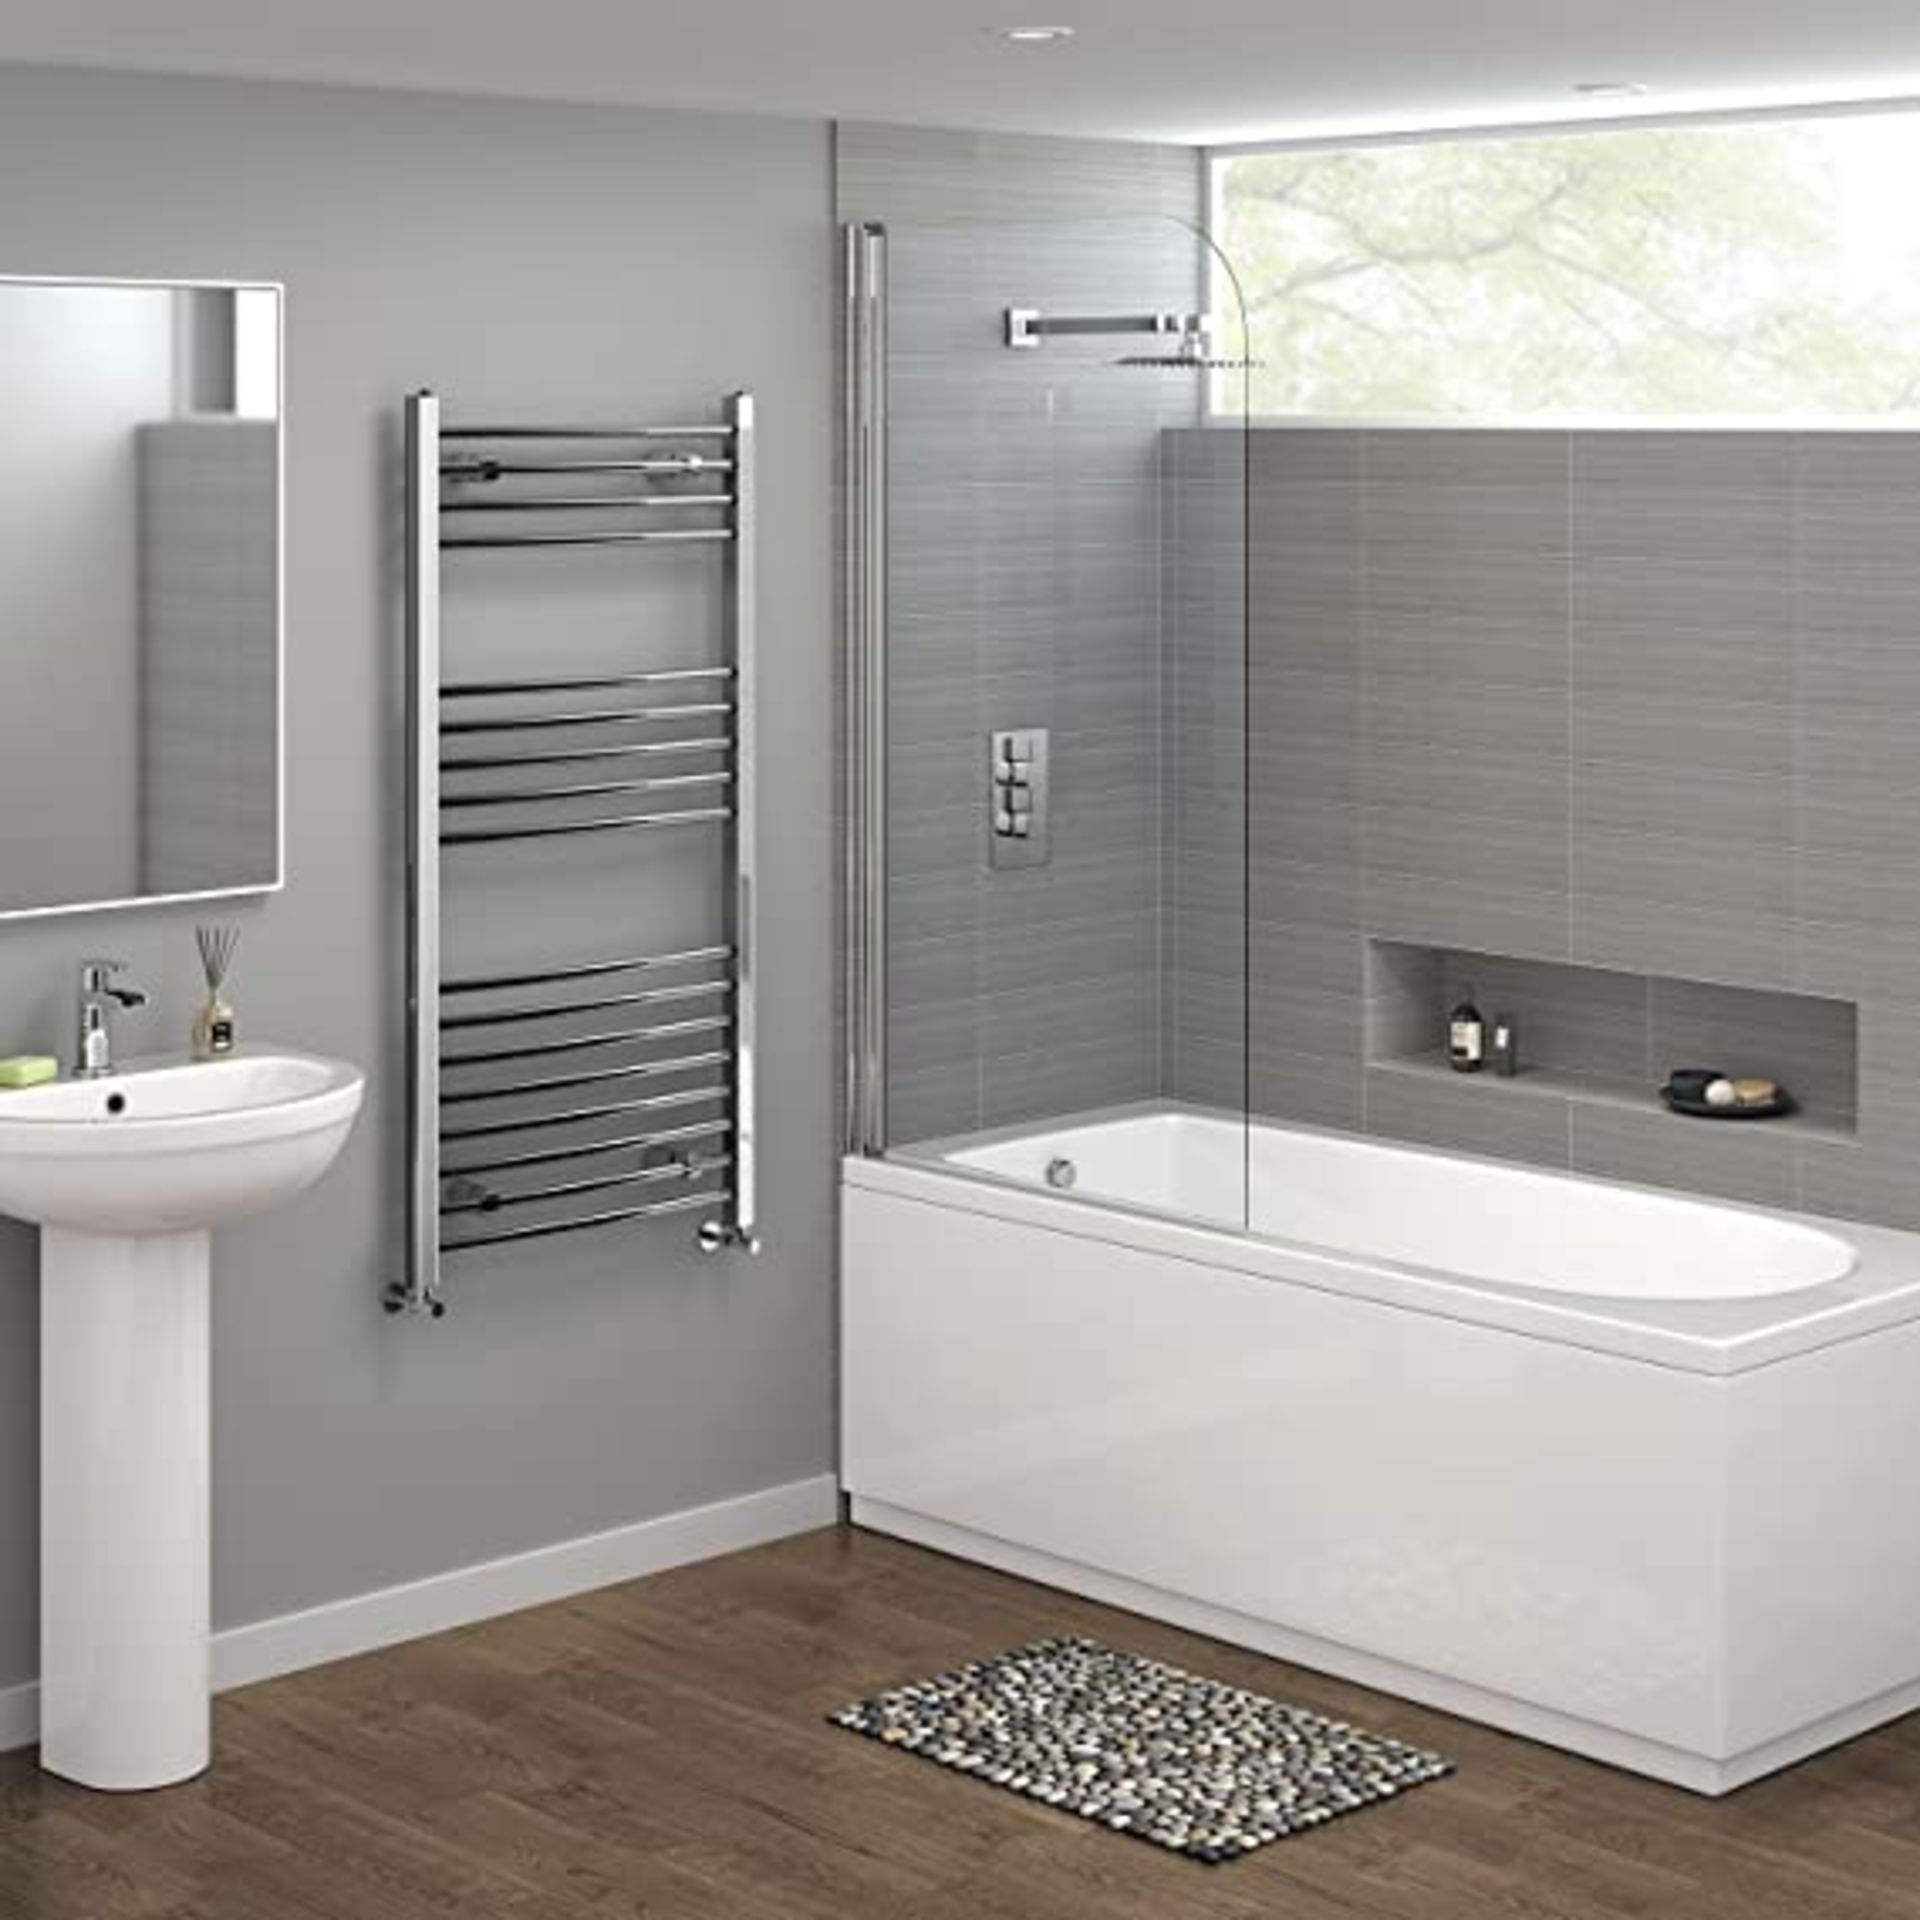 New 1200X600Mm - 20Mm Tubes - Chrome Curved Rail Ladder Towel Radiator.Nc1200600.Made From Chrome - Image 2 of 2